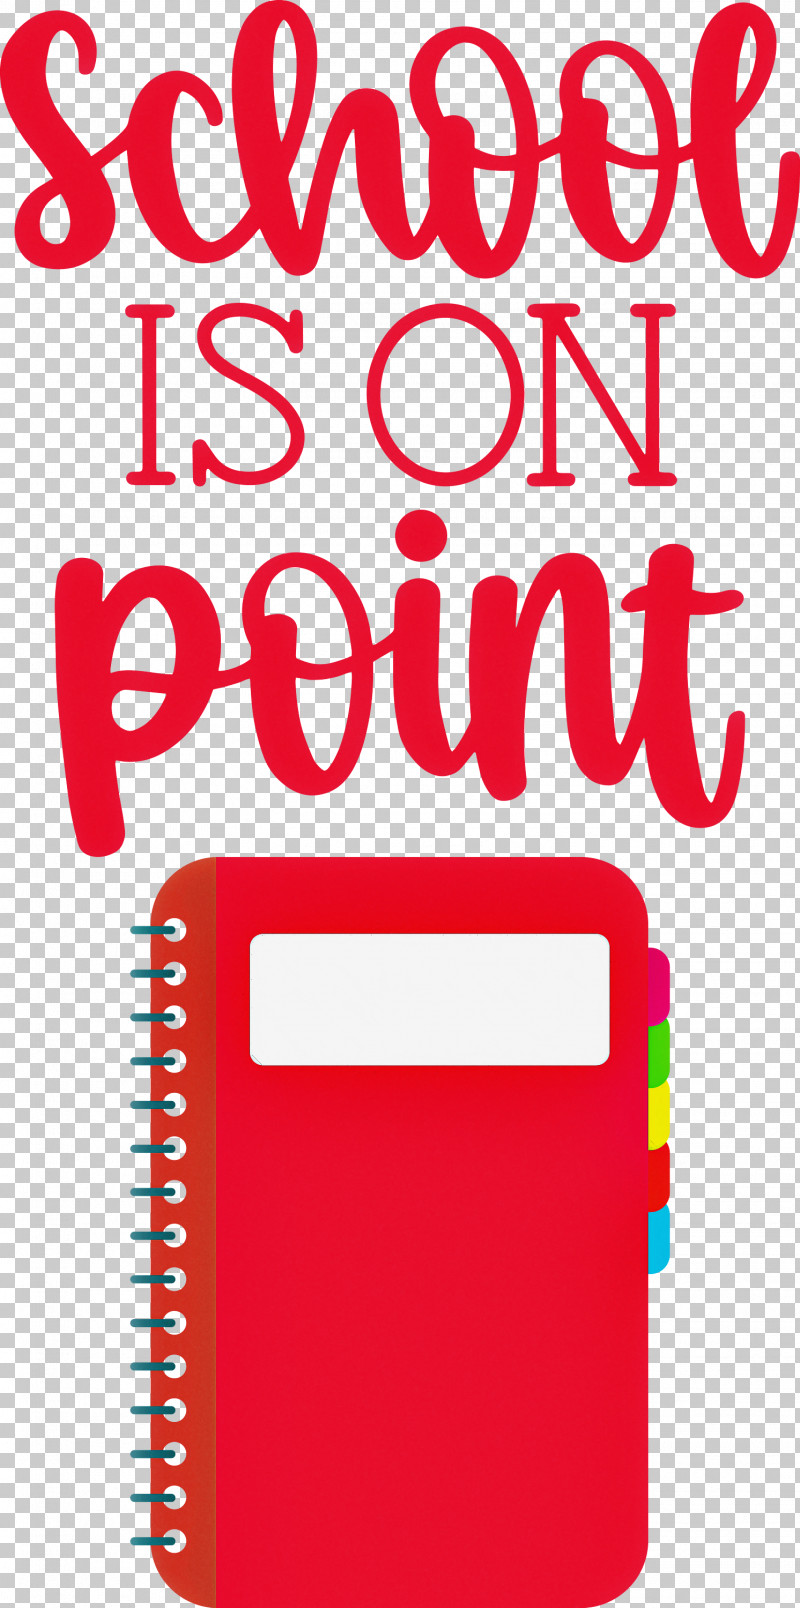 School Is On Point School Education PNG, Clipart, Education, Fifth Grade, Meter, Personal, Quotation Free PNG Download